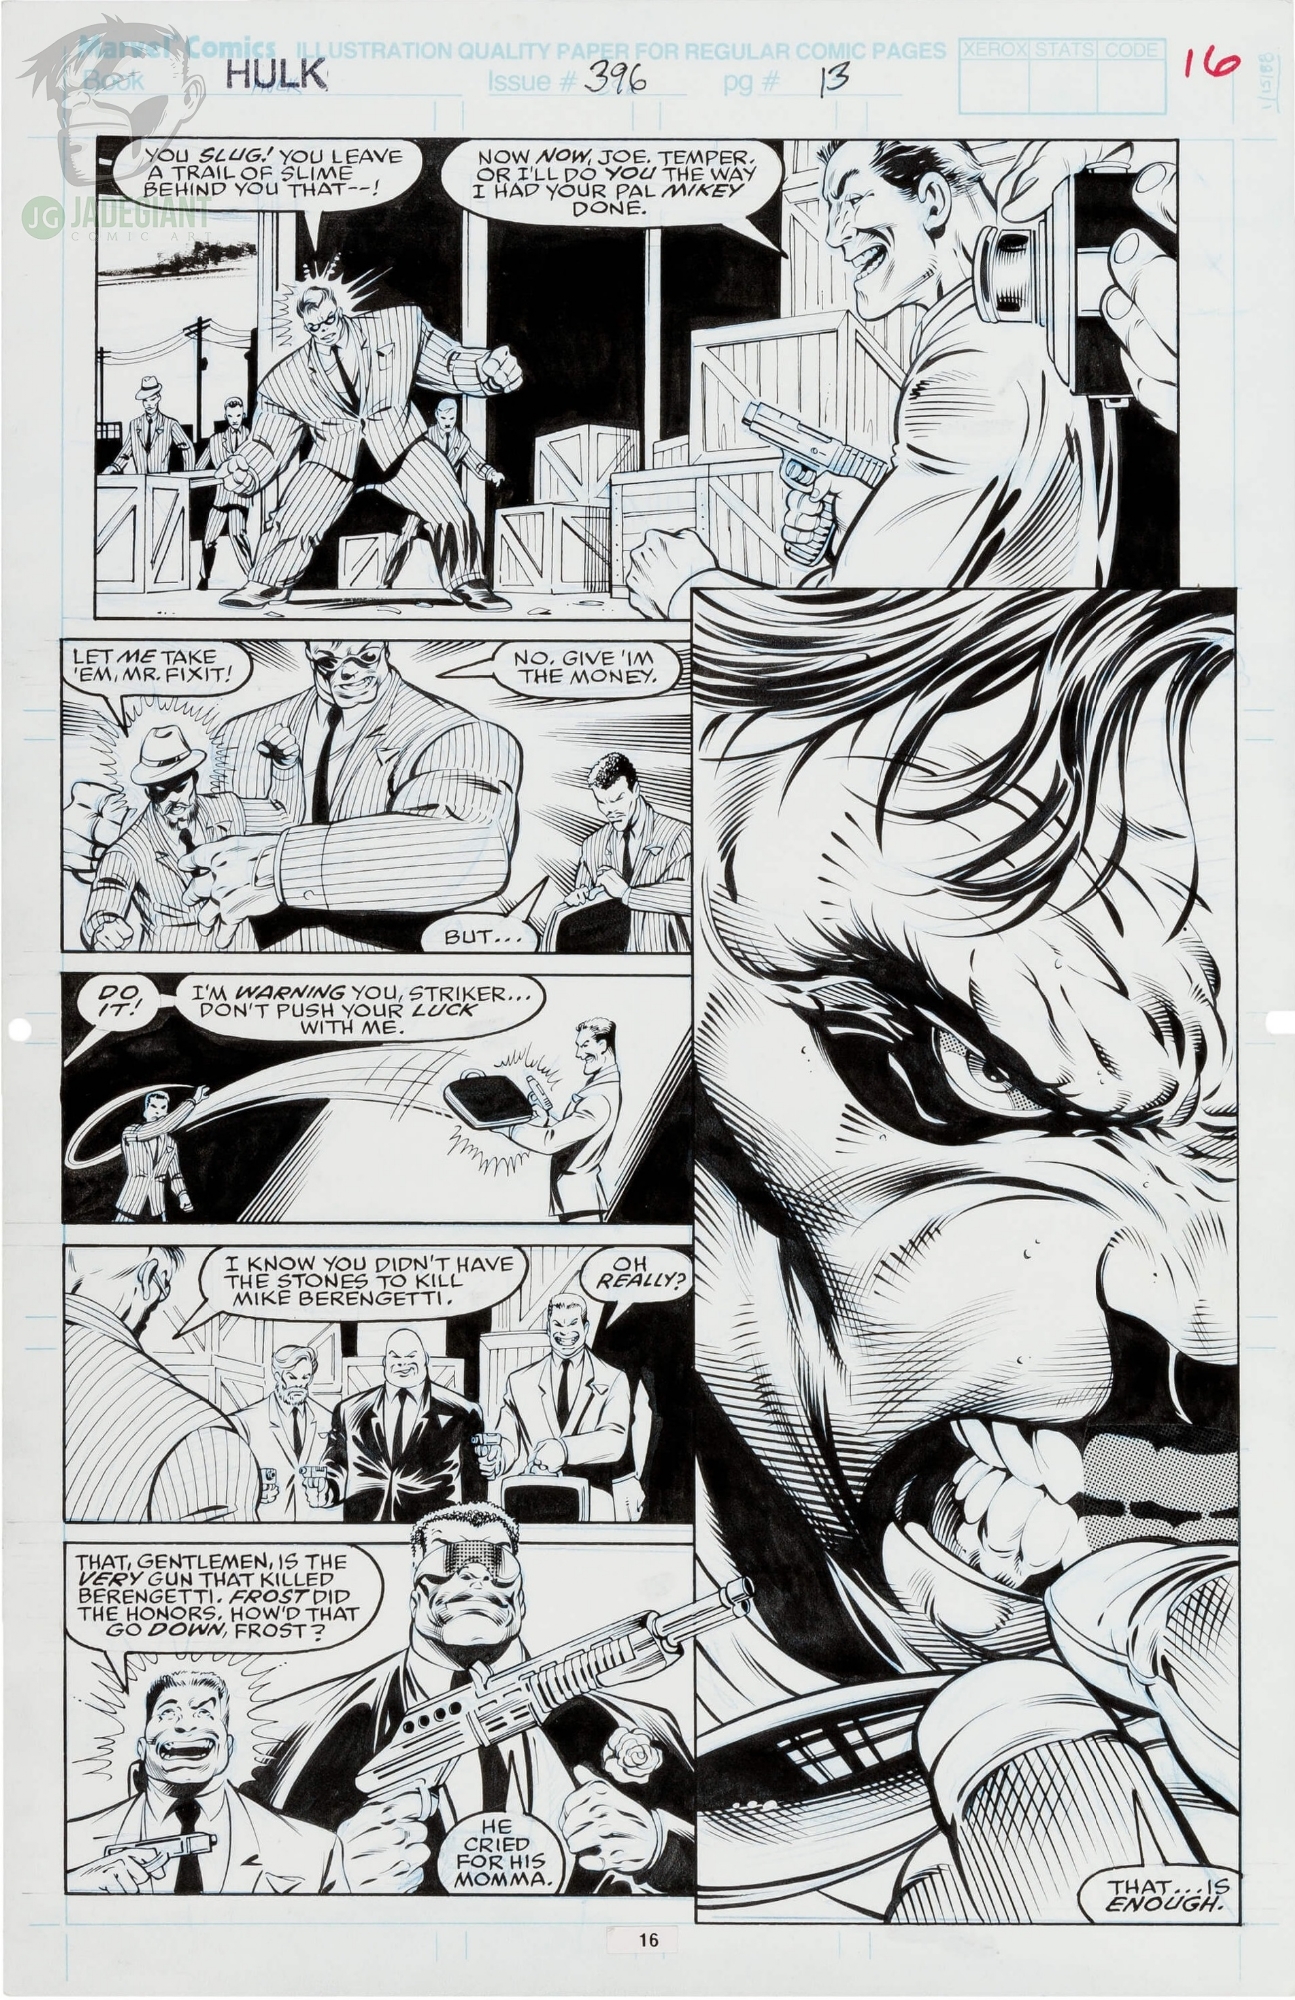 1992 Incredible Hulk issue 396 page 13 by Dale Keown and Mark Farmer Comic Art